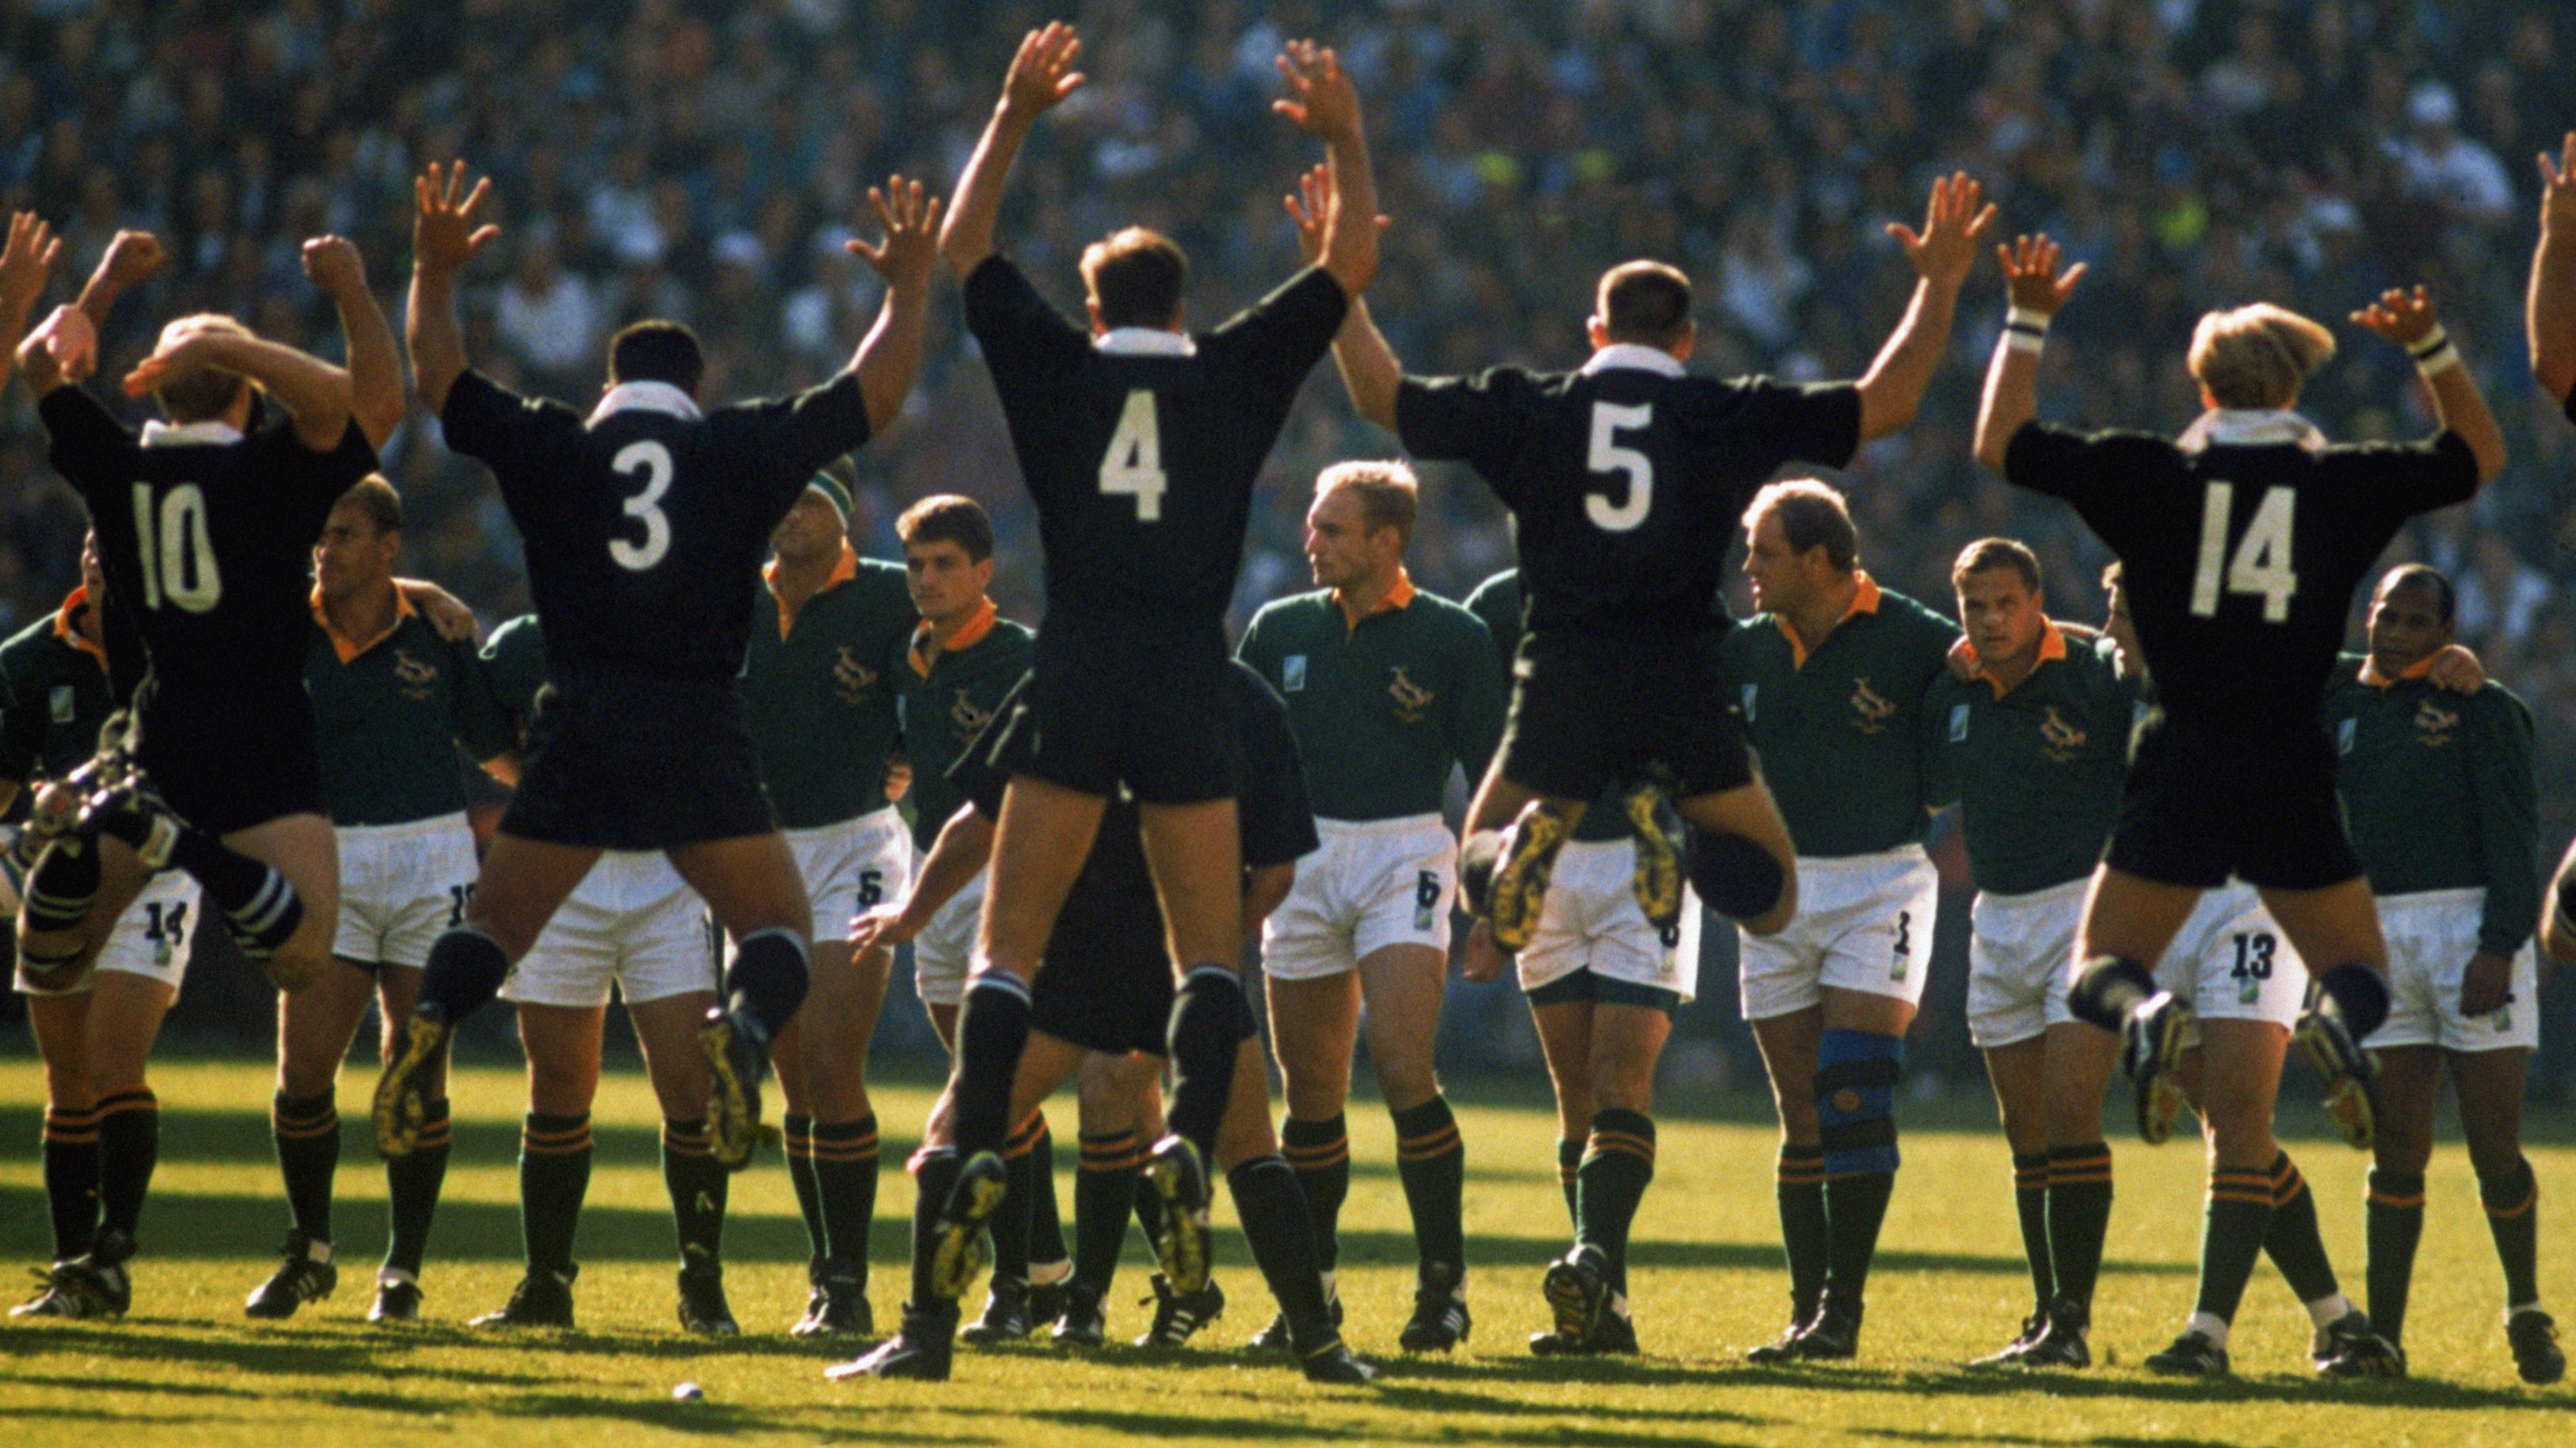 The iconic moments from rugby's greatest rivalry